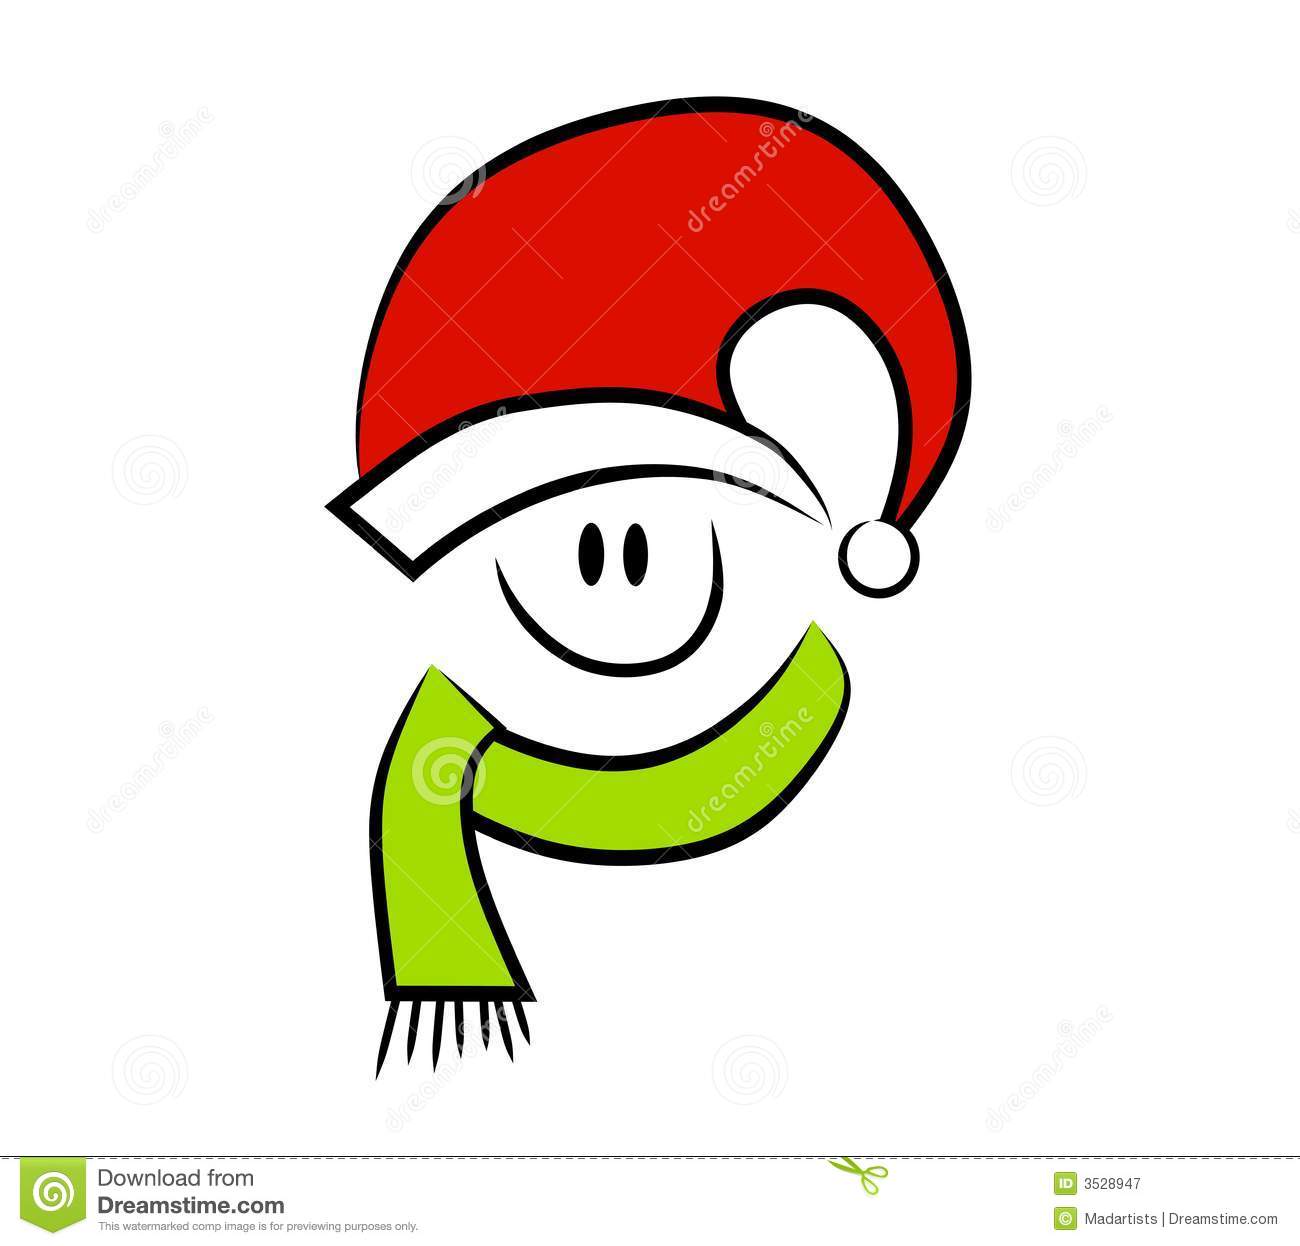 Smiling Christmas Happy Face Royalty Free Stock Photography   Image